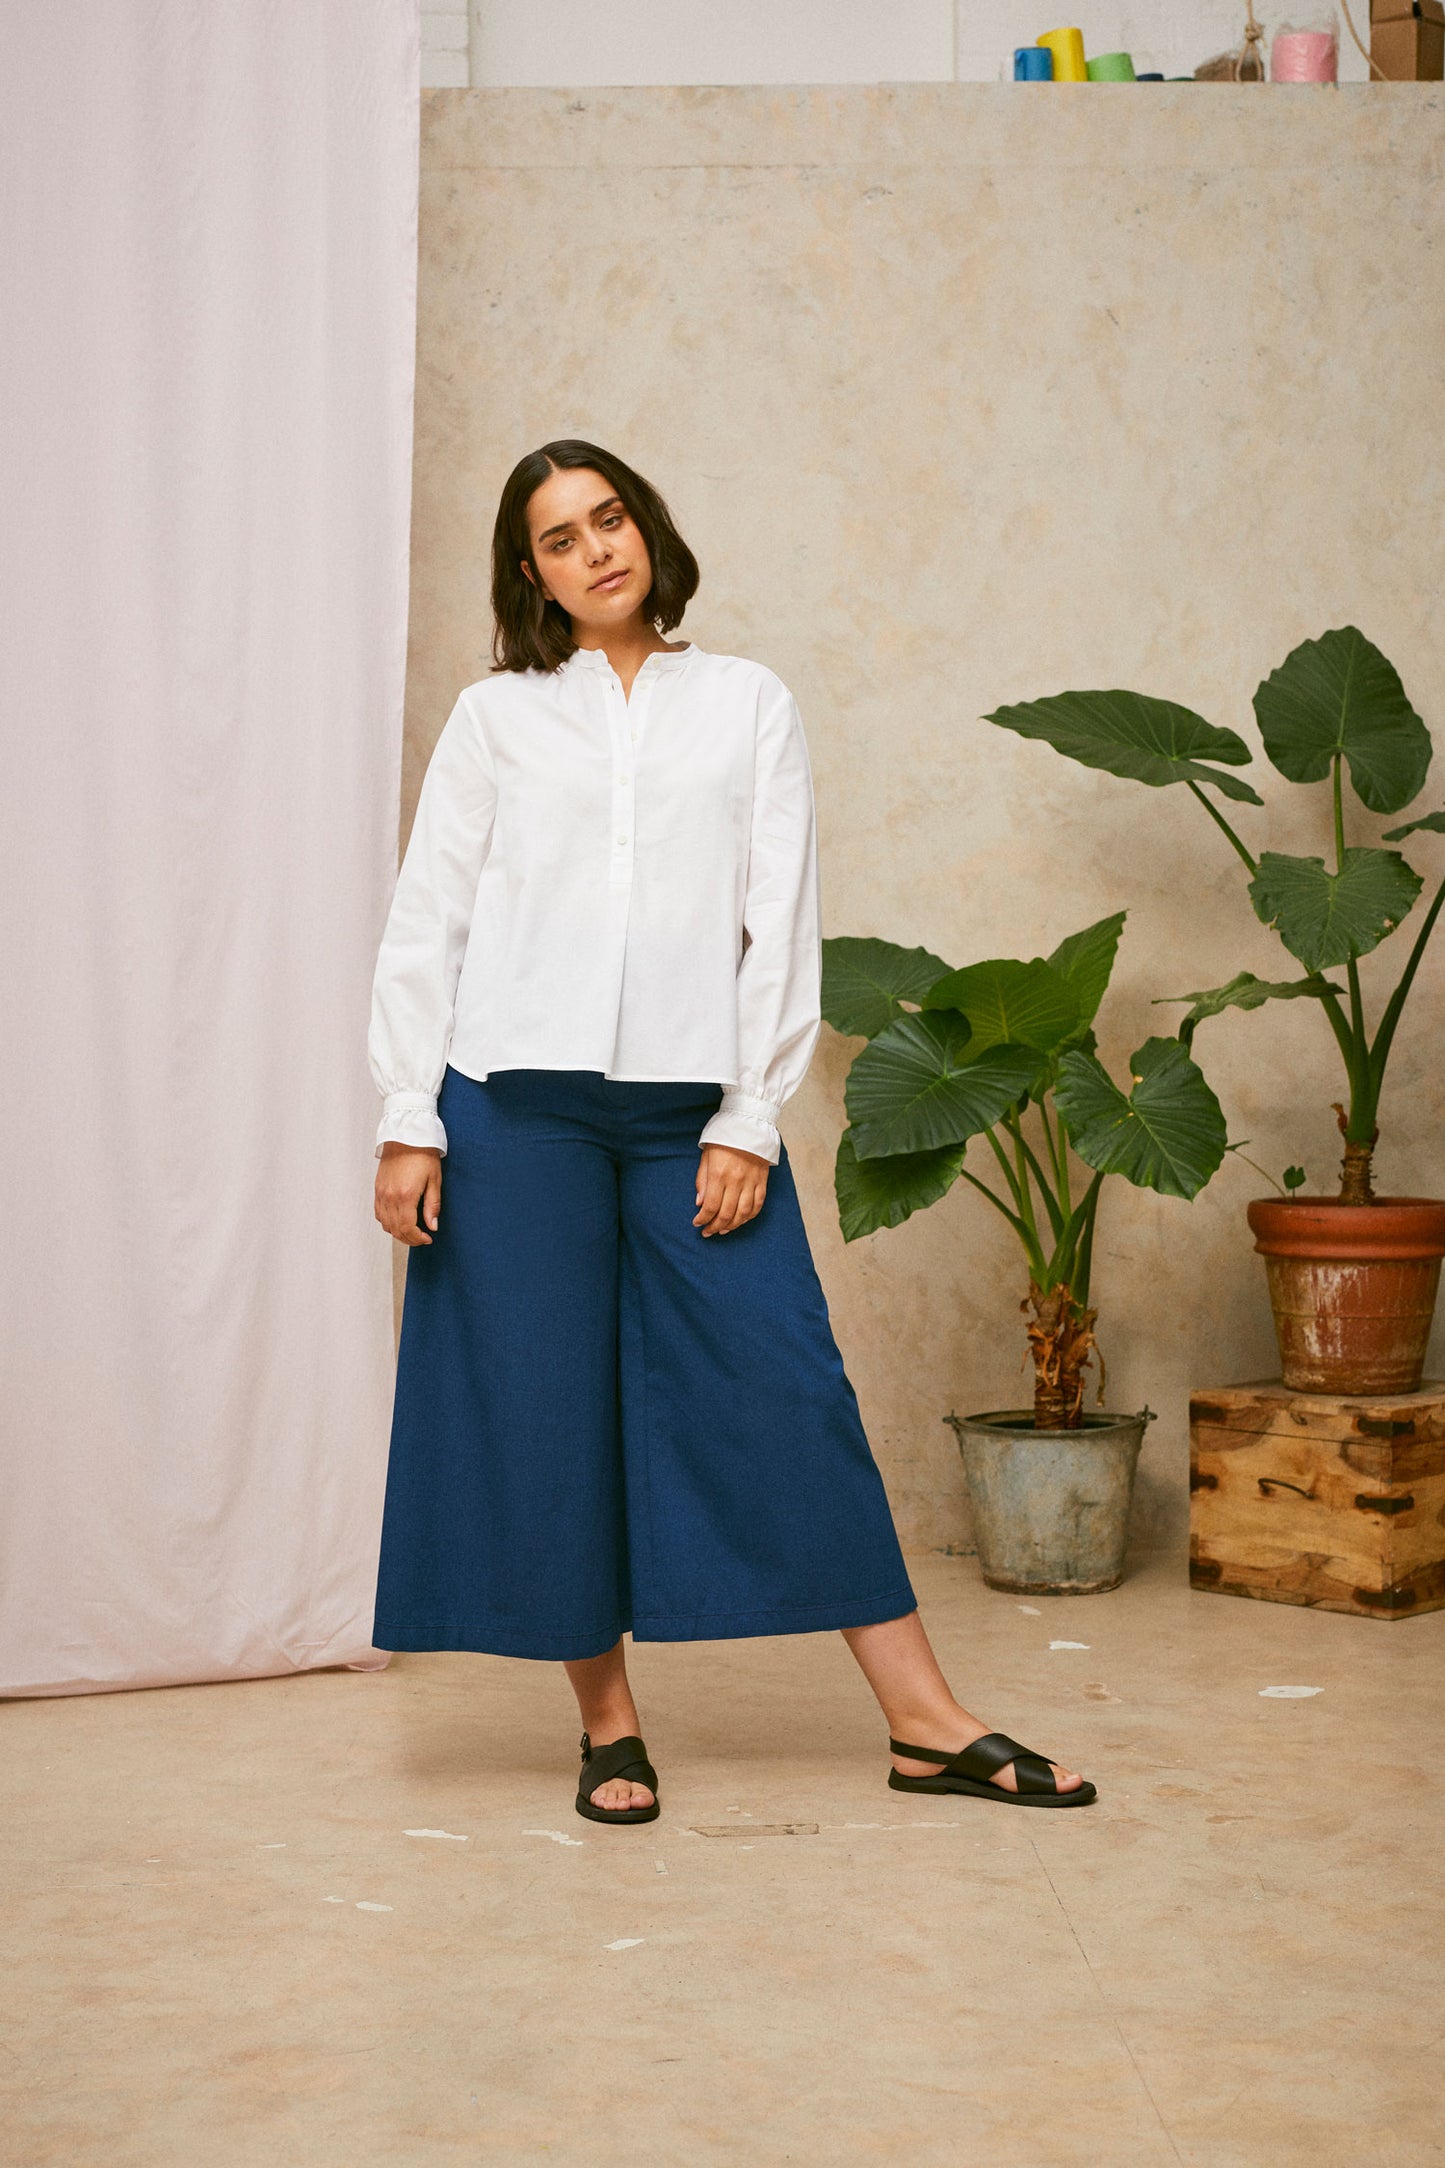 Full length shot of model wearing Saywood's Amelia denim trousers, wide leg culotte shape in Japanese denim, with black sandals. Worn with the white blouse, Marie a-line-shirt. A plant and drop of pink fabric can be seen in the background.